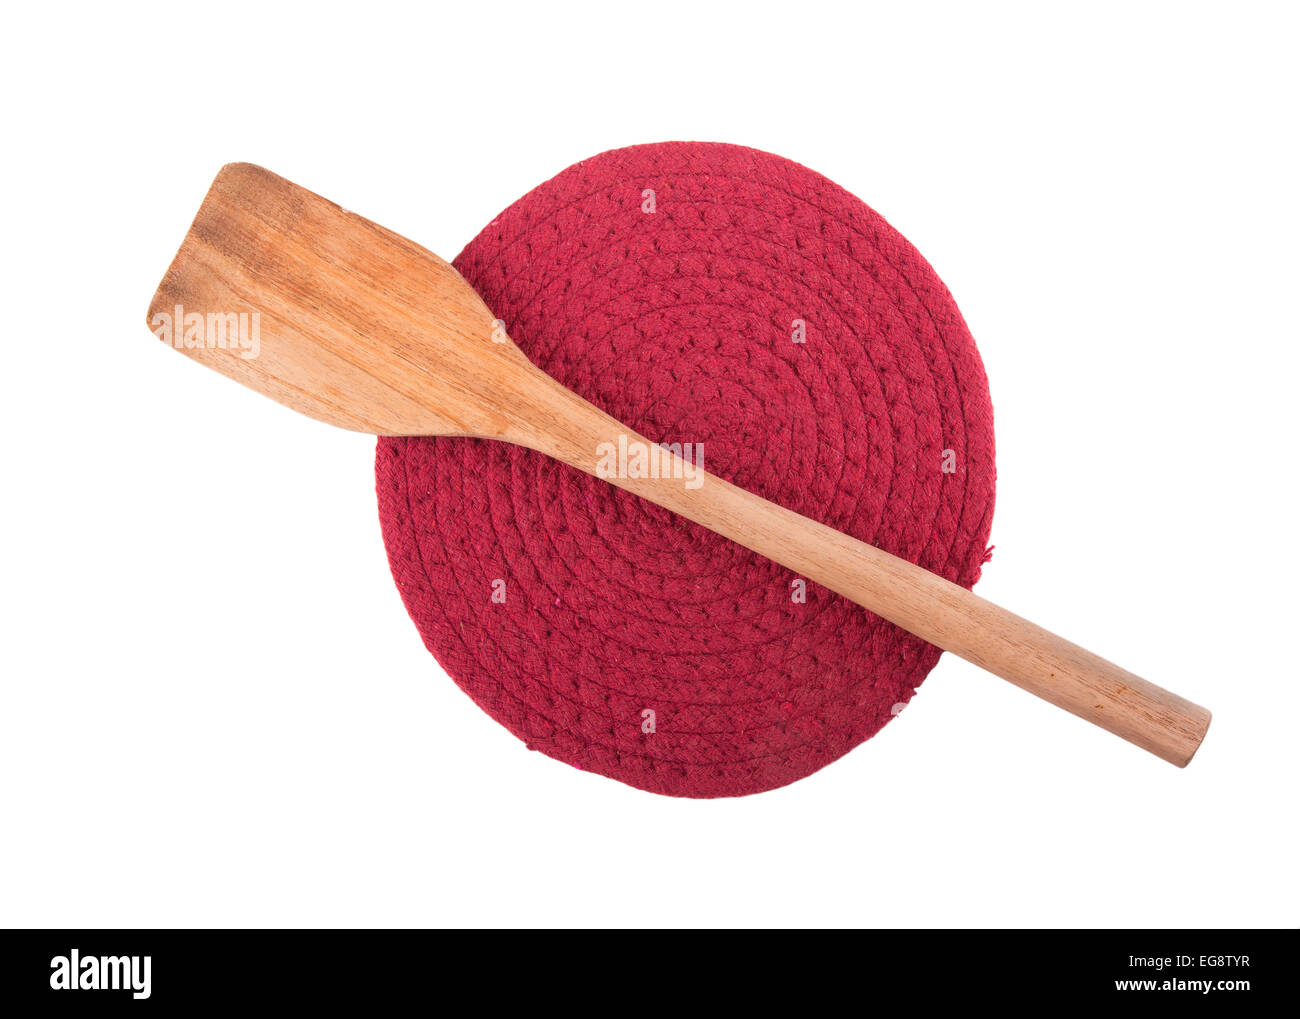 Wooden spatula on dark red knit pot holder, isolated on white Stock Photo